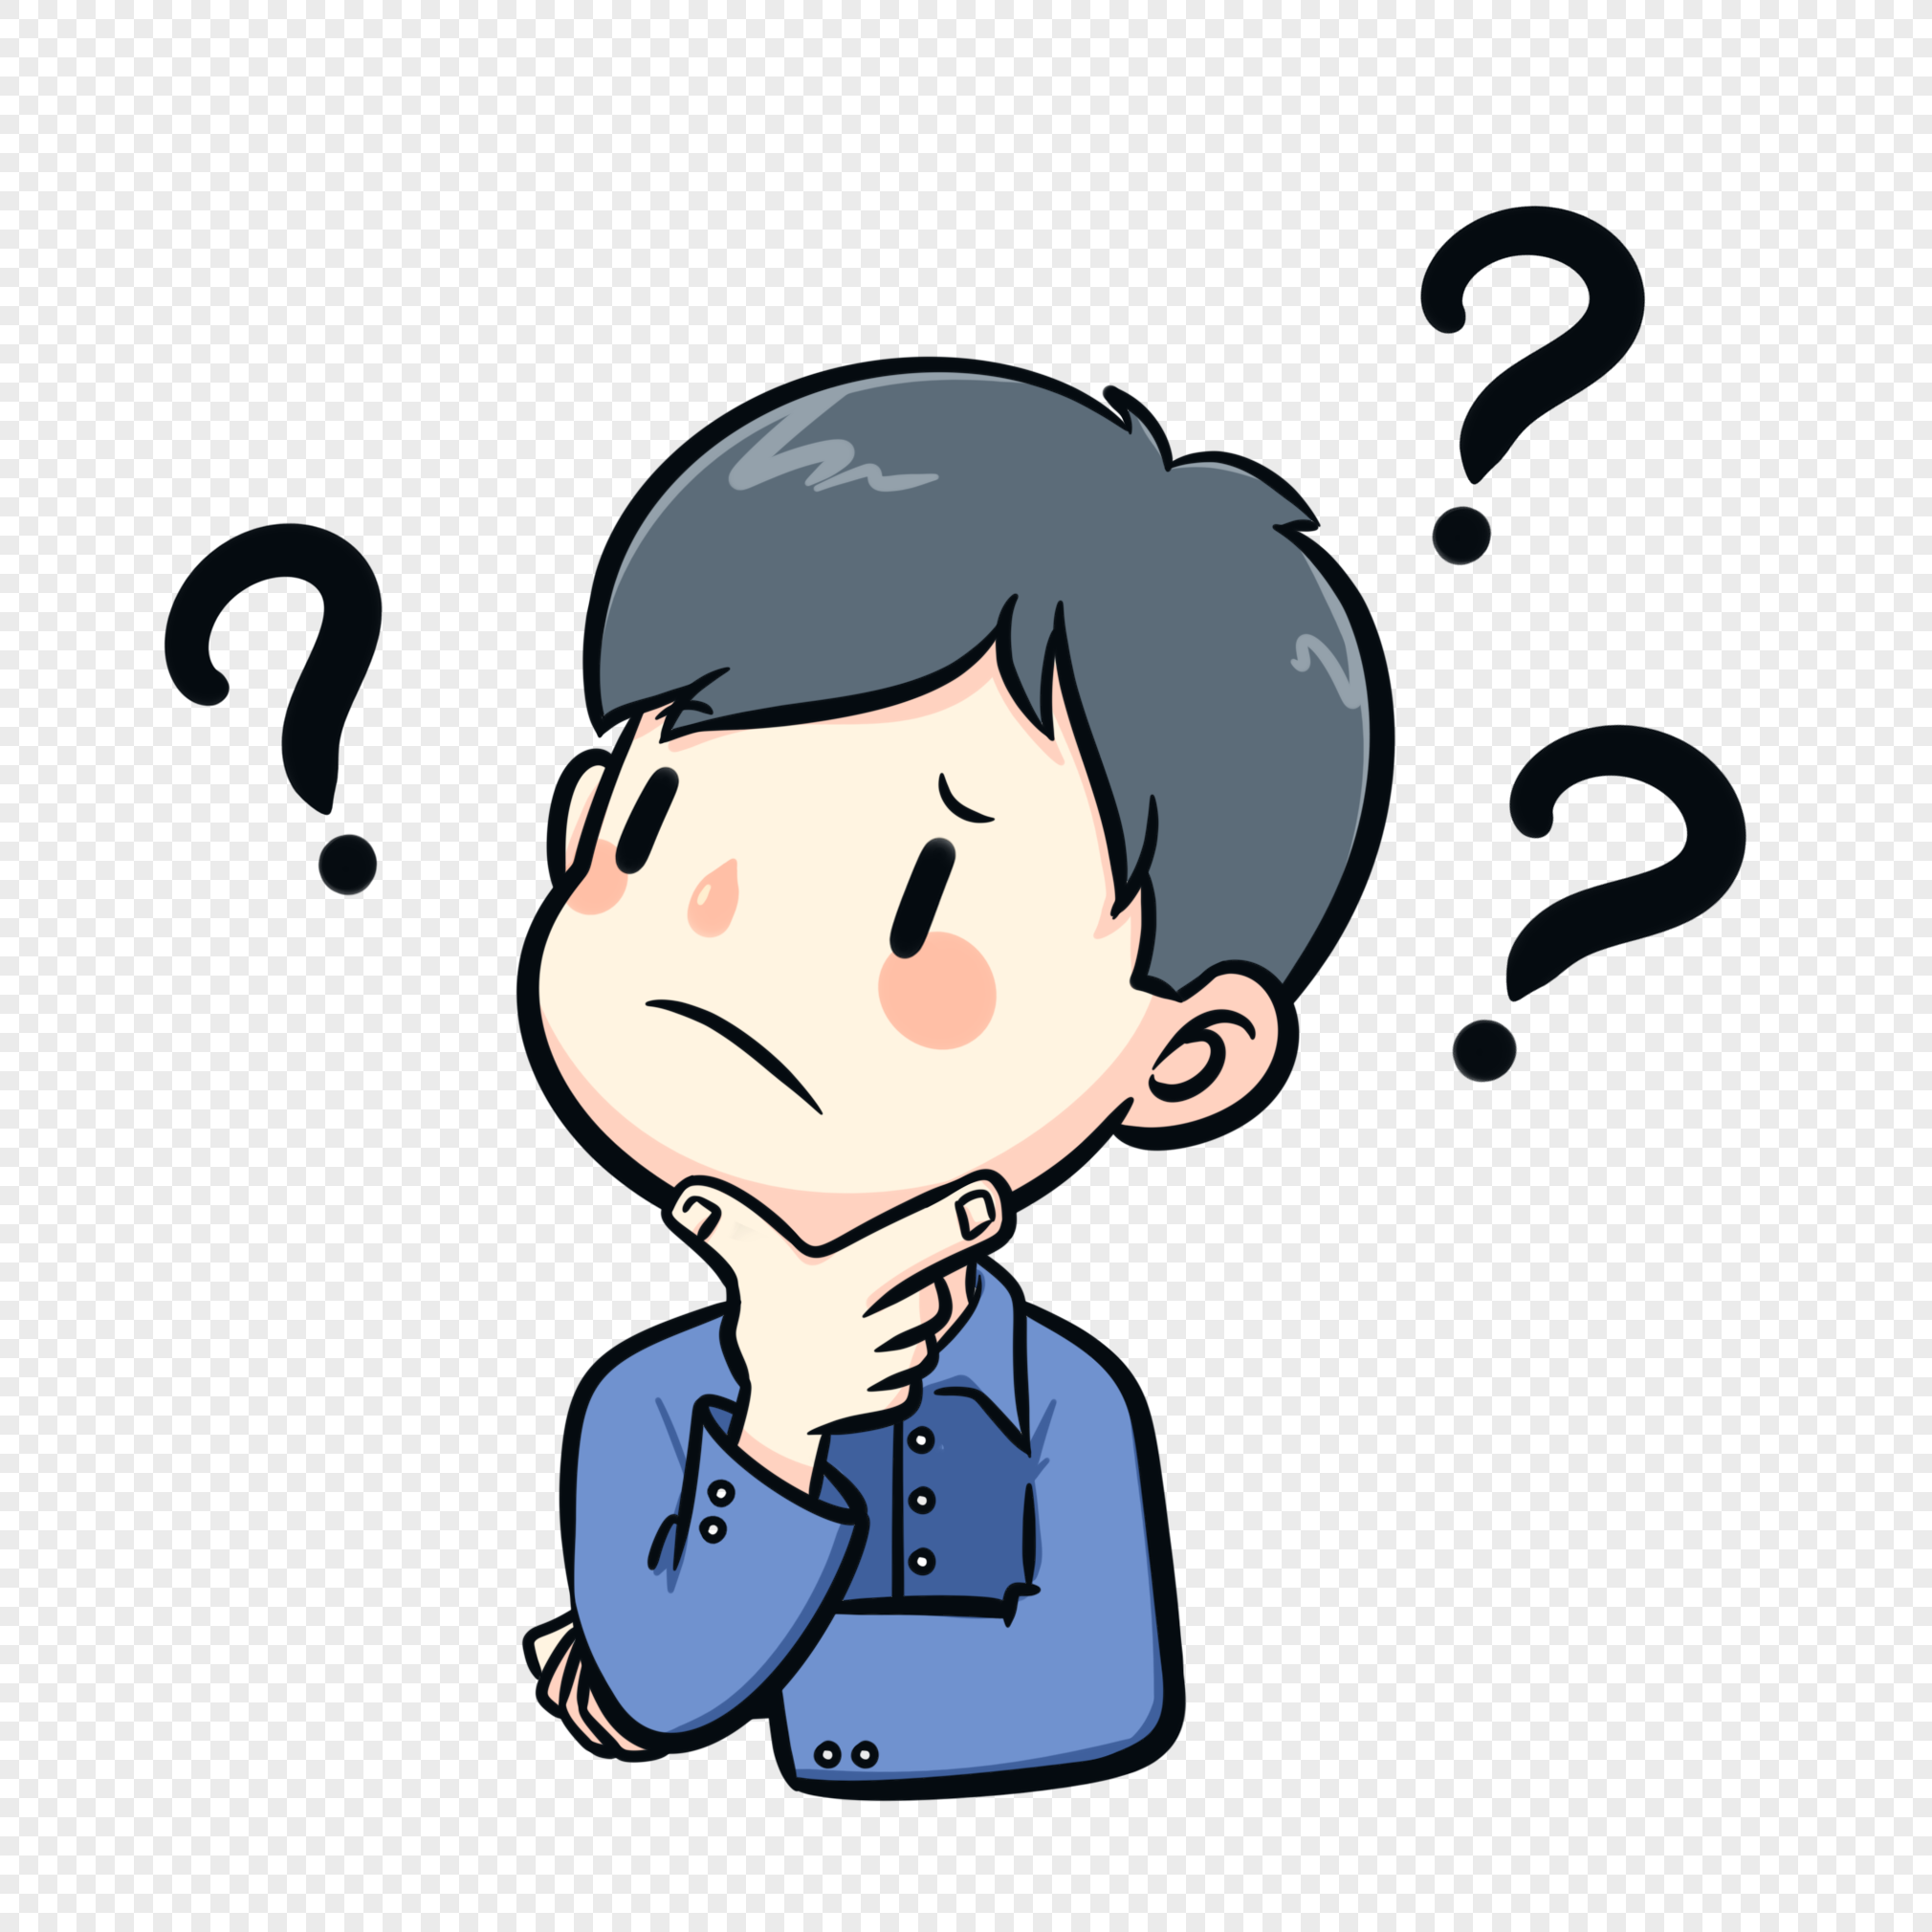 Confused person png image_picture free download